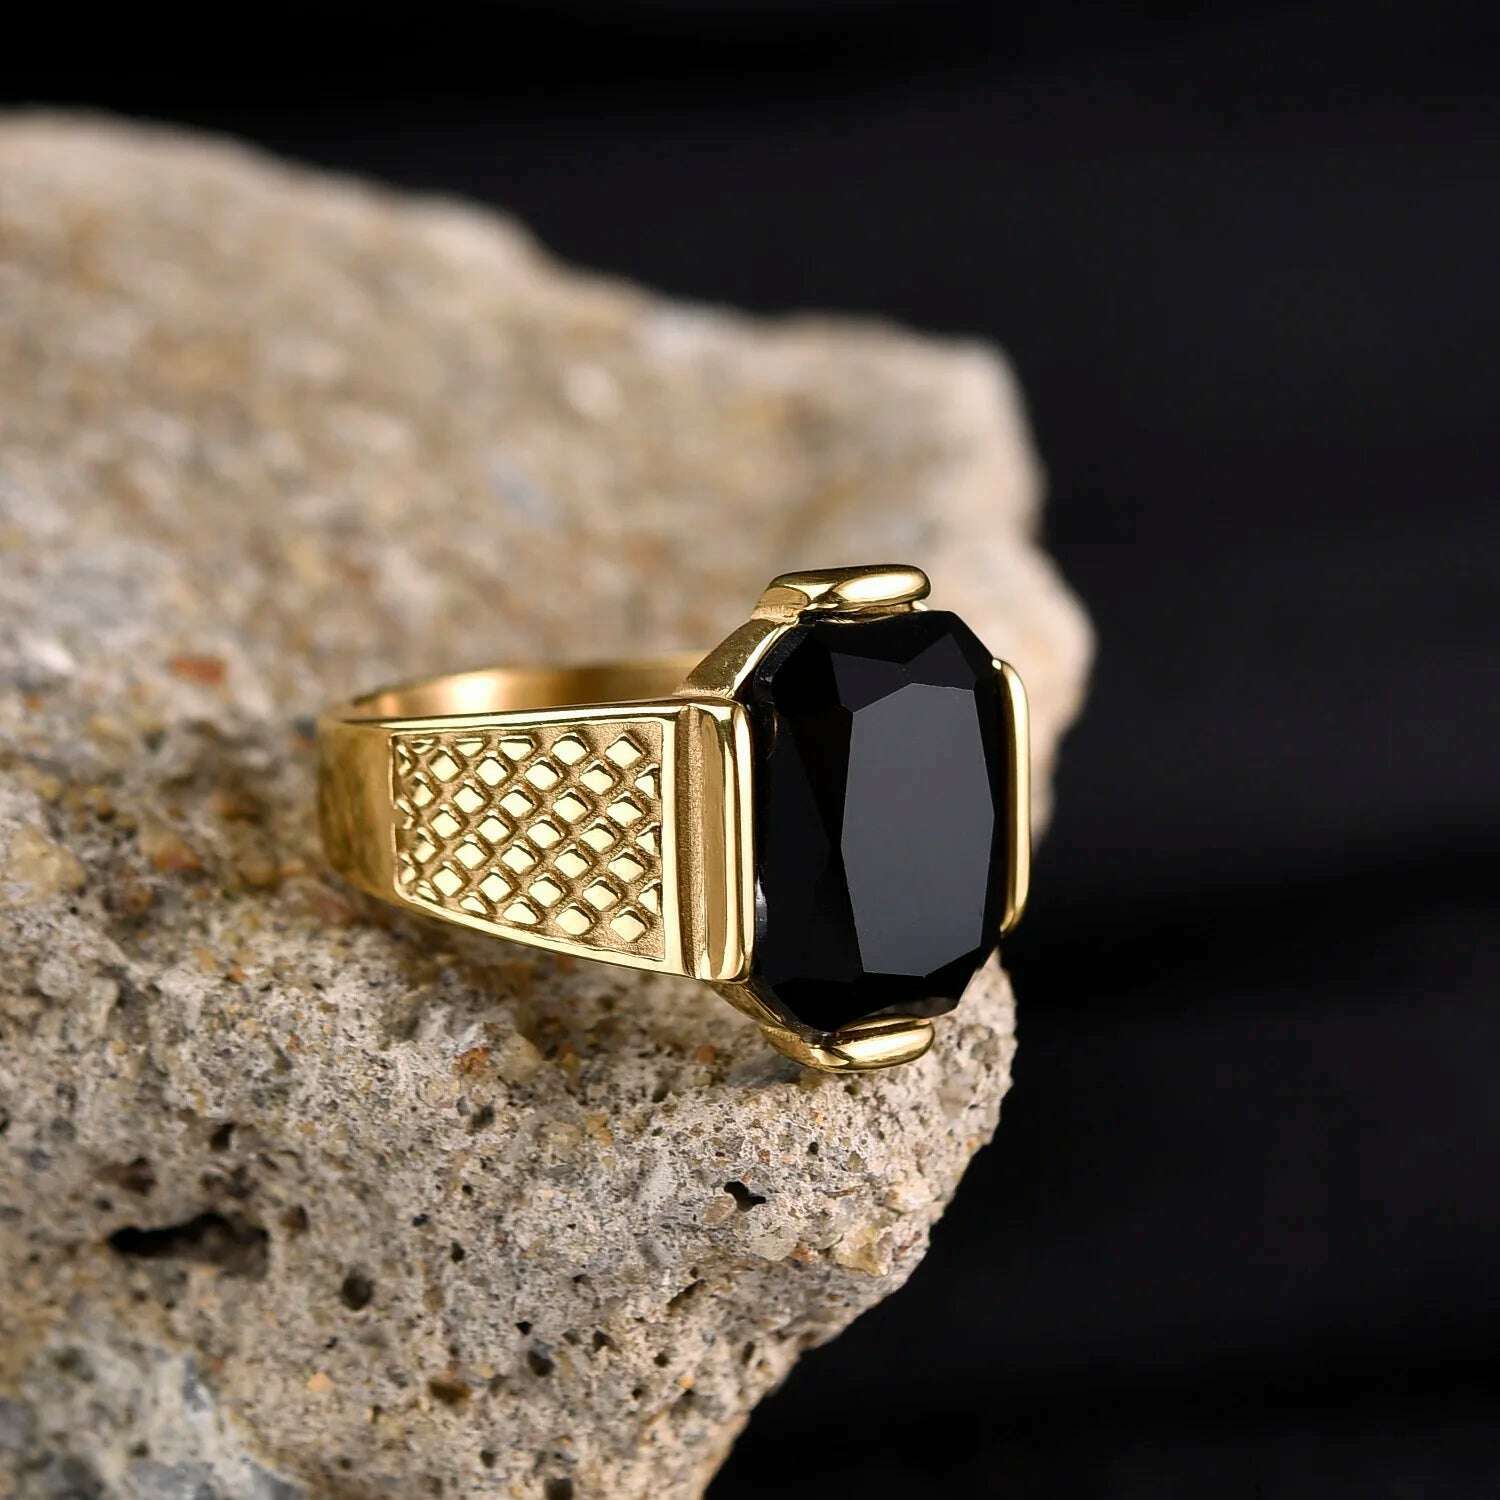 Men's High Quality Vintage Stainless Steel Gemstone Styles 18K Gold Plated Ring Jewelry Professional Factory Made